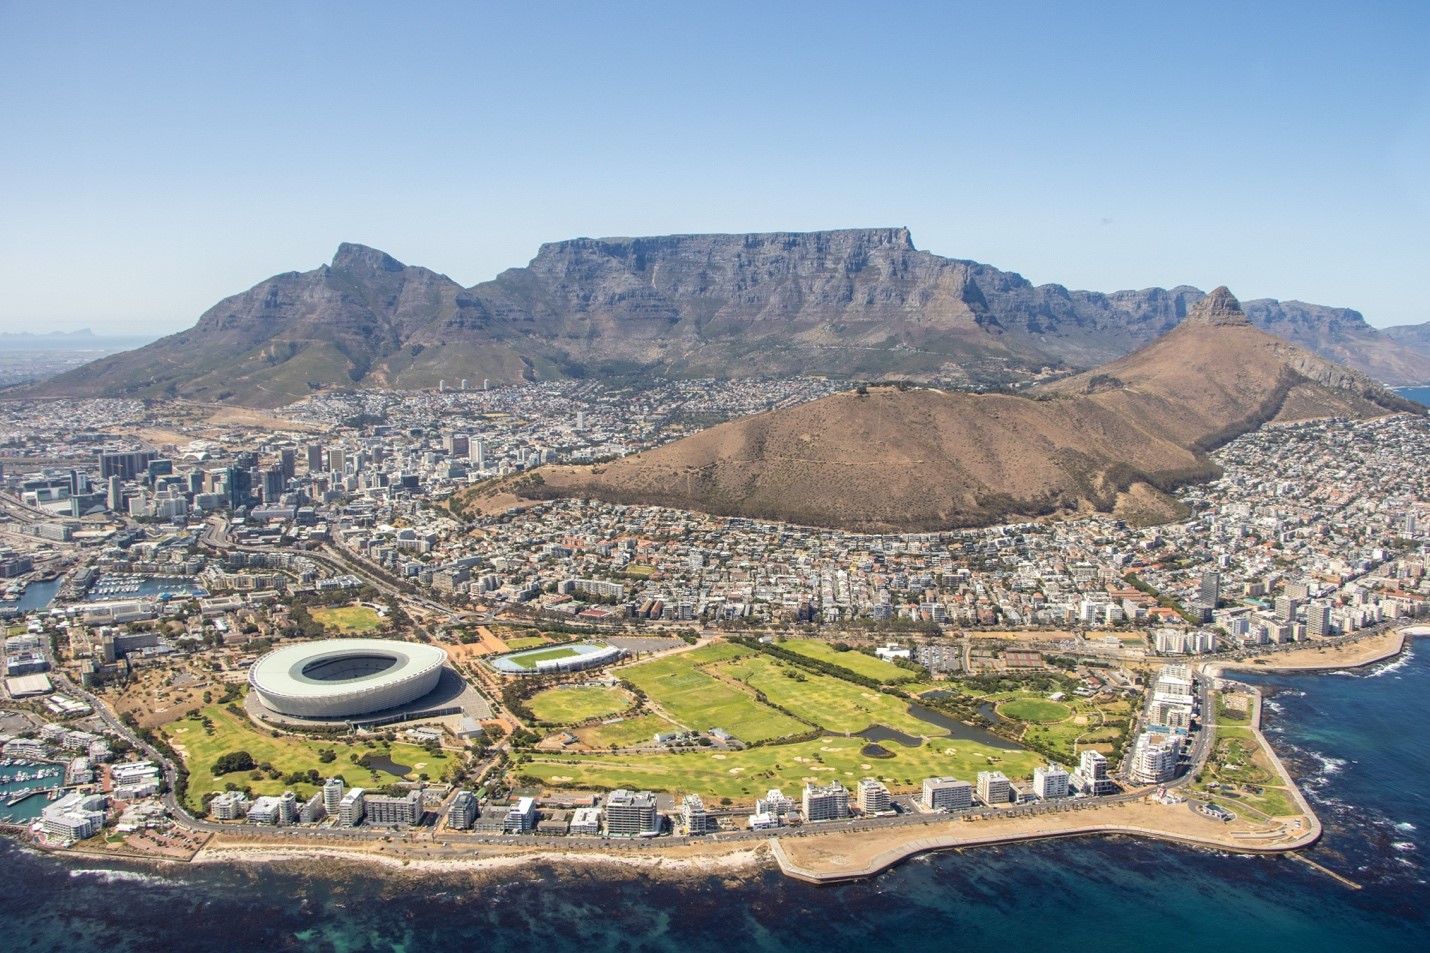 The University of Akron School of Law’s 2024 study abroad program will spend two weeks in South Africa and Botswana, including Cape Town, South Africa, shown here.